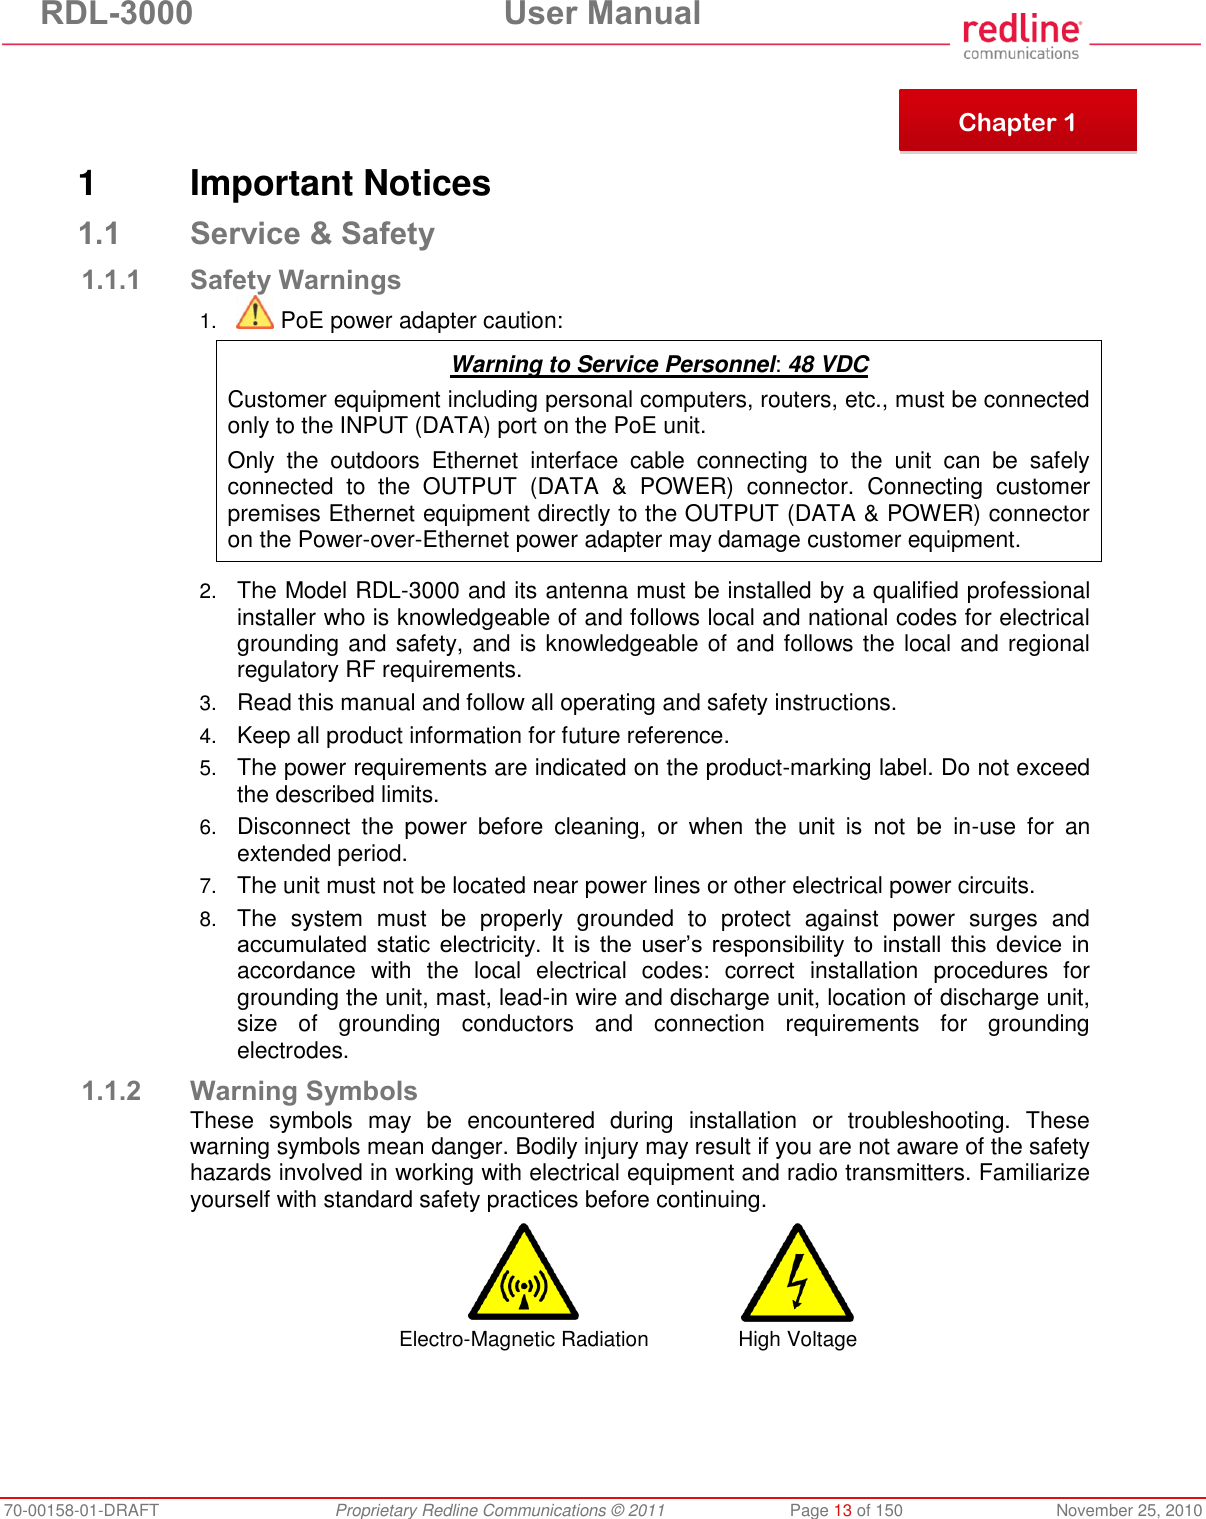 RDL-3000  User Manual 70-00158-01-DRAFT  Proprietary Redline Communications © 2011  Page 13 of 150  November 25, 2010      1  Important Notices 1.1 Service &amp; Safety 1.1.1 Safety Warnings 1.  PoE power adapter caution:  Warning to Service Personnel: 48 VDC Customer equipment including personal computers, routers, etc., must be connected only to the INPUT (DATA) port on the PoE unit.  Only  the  outdoors  Ethernet  interface  cable  connecting  to  the  unit  can  be  safely connected  to  the  OUTPUT  (DATA  &amp;  POWER)  connector.  Connecting  customer premises Ethernet equipment directly to the OUTPUT (DATA &amp; POWER) connector on the Power-over-Ethernet power adapter may damage customer equipment.  2. The Model RDL-3000 and its antenna must be installed by a qualified professional installer who is knowledgeable of and follows local and national codes for electrical grounding and safety, and is knowledgeable of and follows the local and regional regulatory RF requirements. 3. Read this manual and follow all operating and safety instructions. 4. Keep all product information for future reference. 5. The power requirements are indicated on the product-marking label. Do not exceed the described limits. 6. Disconnect  the  power  before  cleaning,  or  when  the  unit  is  not  be  in-use  for  an extended period. 7. The unit must not be located near power lines or other electrical power circuits. 8. The  system  must  be  properly  grounded  to  protect  against  power  surges  and accumulated static  electricity.  It  is the  user’s responsibility to  install  this device in accordance  with  the  local  electrical  codes:  correct  installation  procedures  for grounding the unit, mast, lead-in wire and discharge unit, location of discharge unit, size  of  grounding  conductors  and  connection  requirements  for  grounding electrodes. 1.1.2 Warning Symbols These  symbols  may  be  encountered  during  installation  or  troubleshooting.  These warning symbols mean danger. Bodily injury may result if you are not aware of the safety hazards involved in working with electrical equipment and radio transmitters. Familiarize yourself with standard safety practices before continuing.   Electro-Magnetic Radiation High Voltage   Chapter 1 